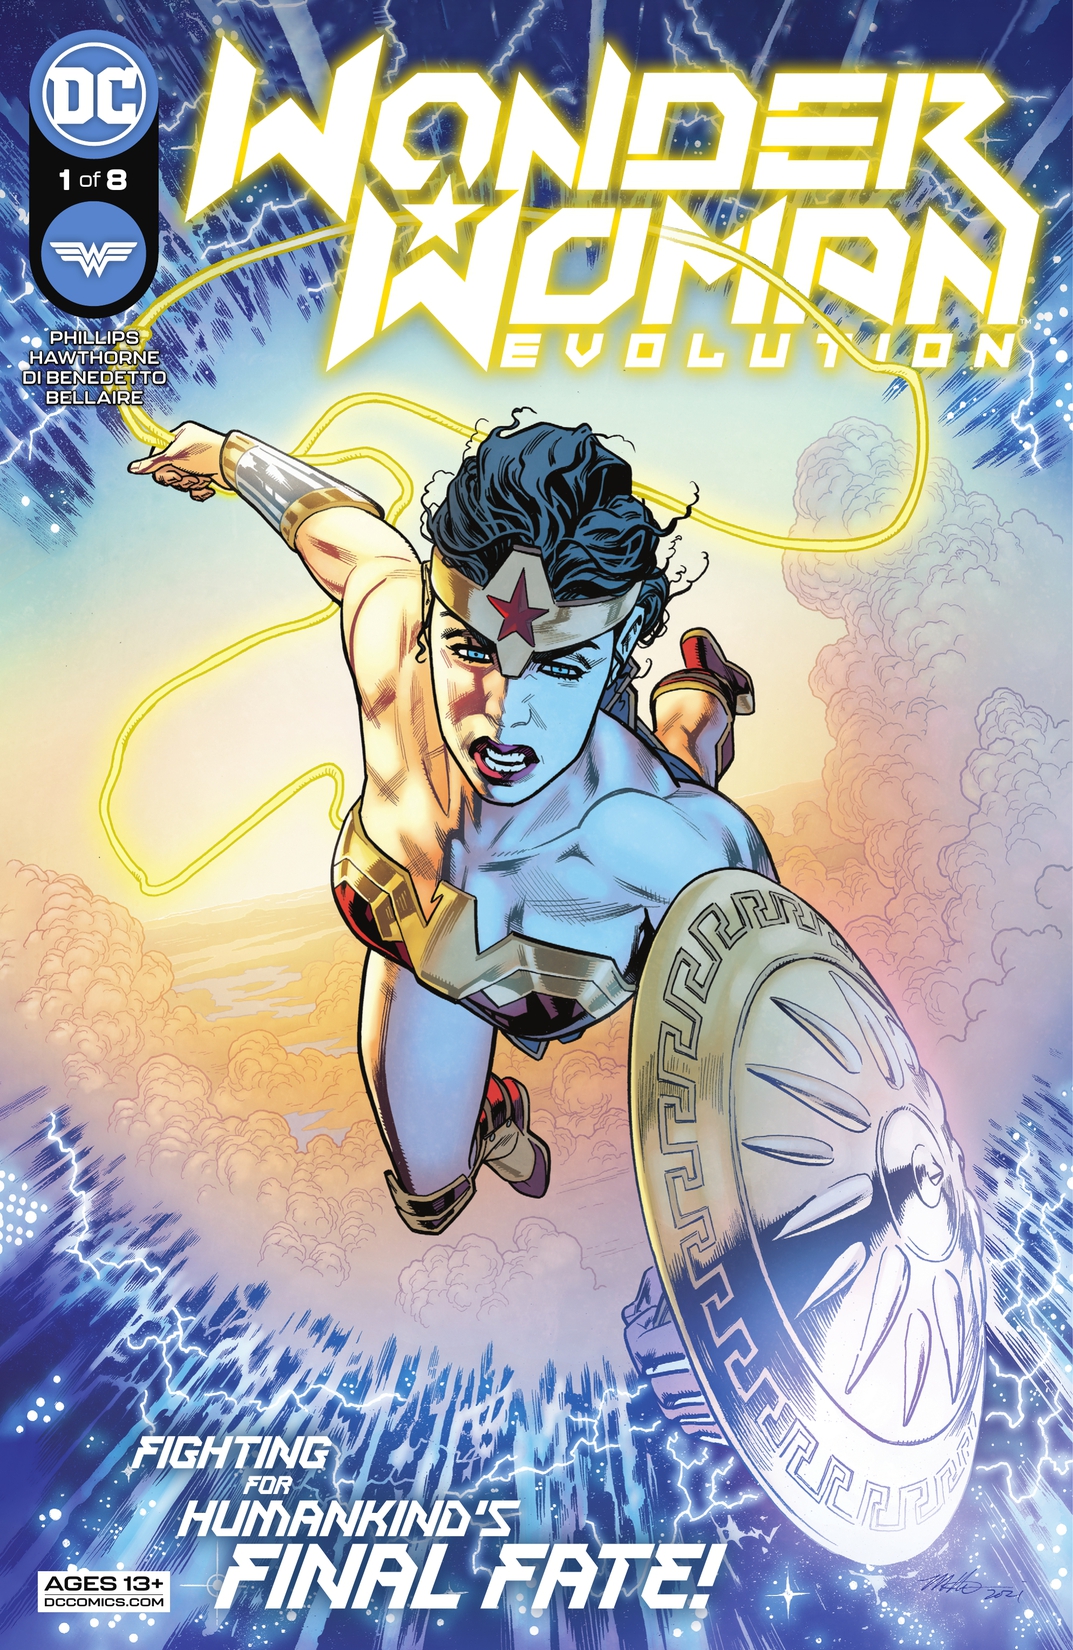 Wonder Woman: Evolution #1 preview images